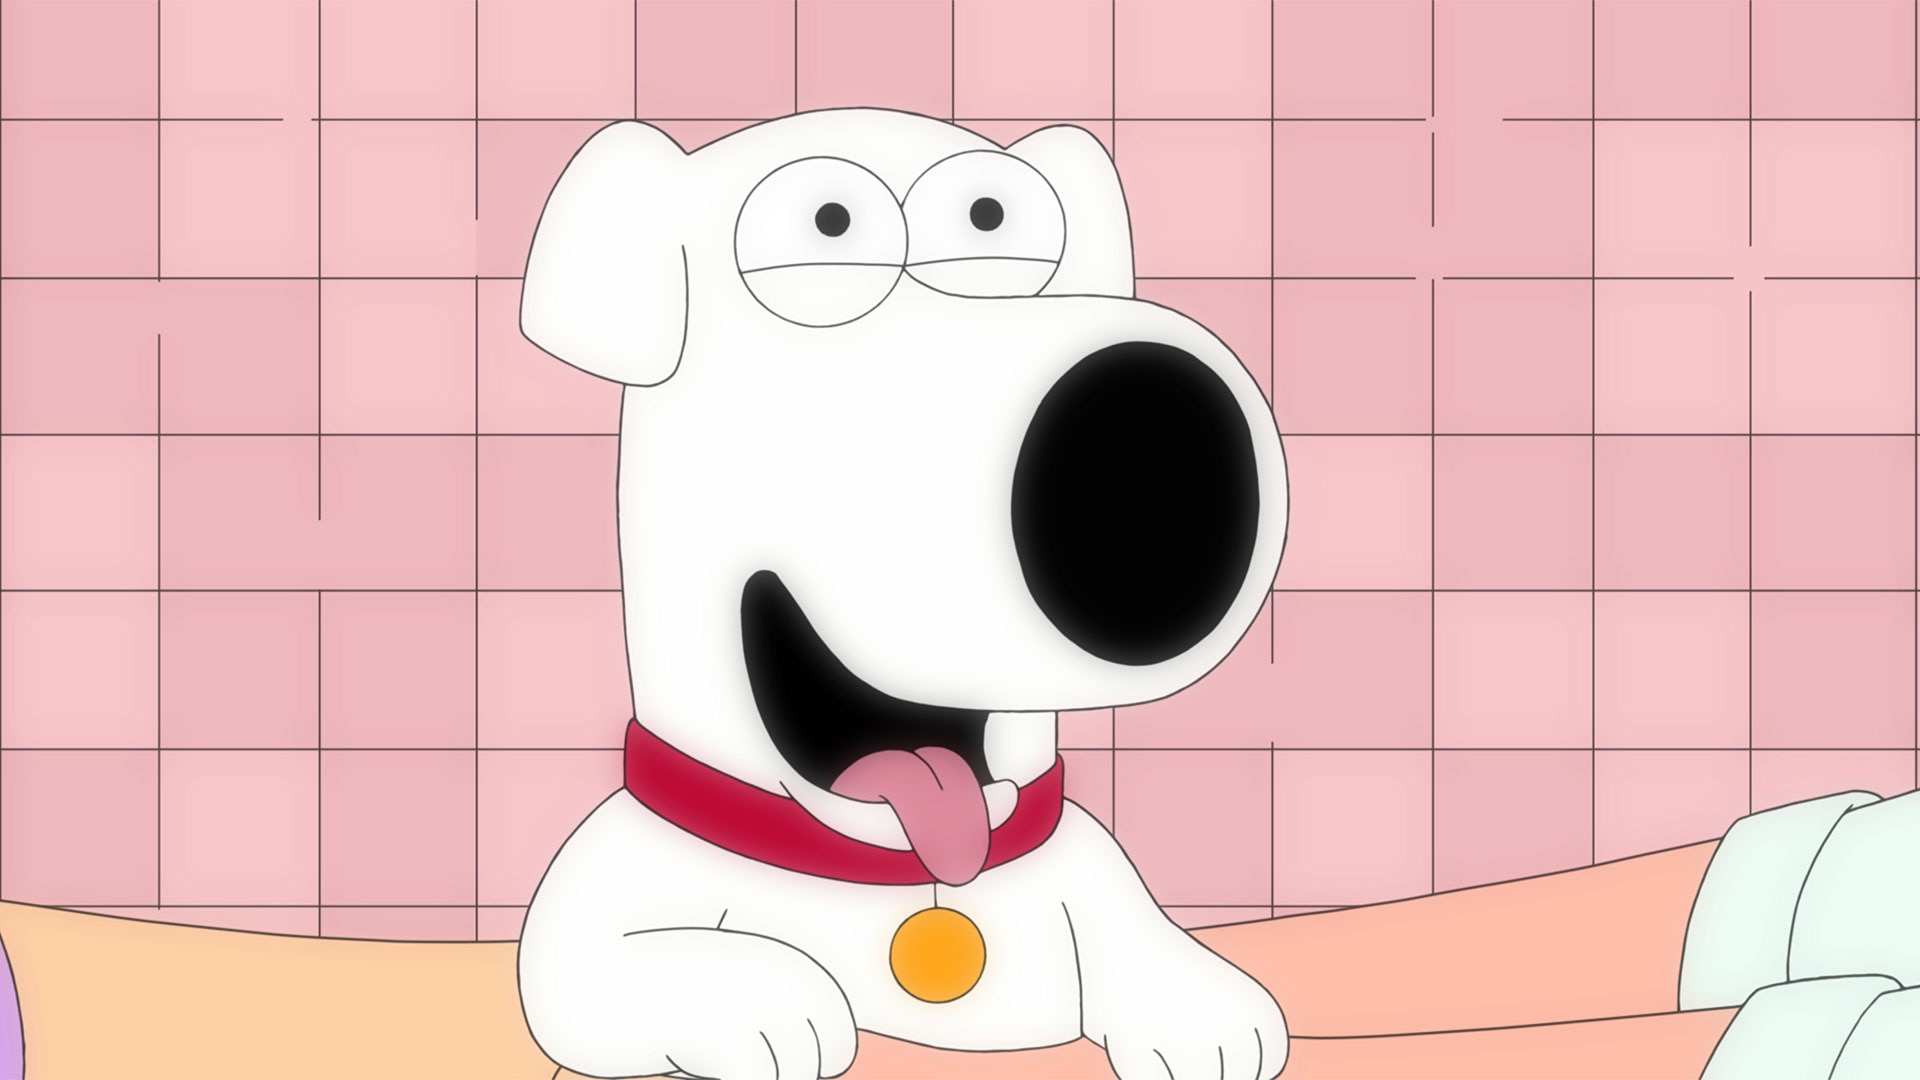 Watch Family Guy TV Show - Streaming Online